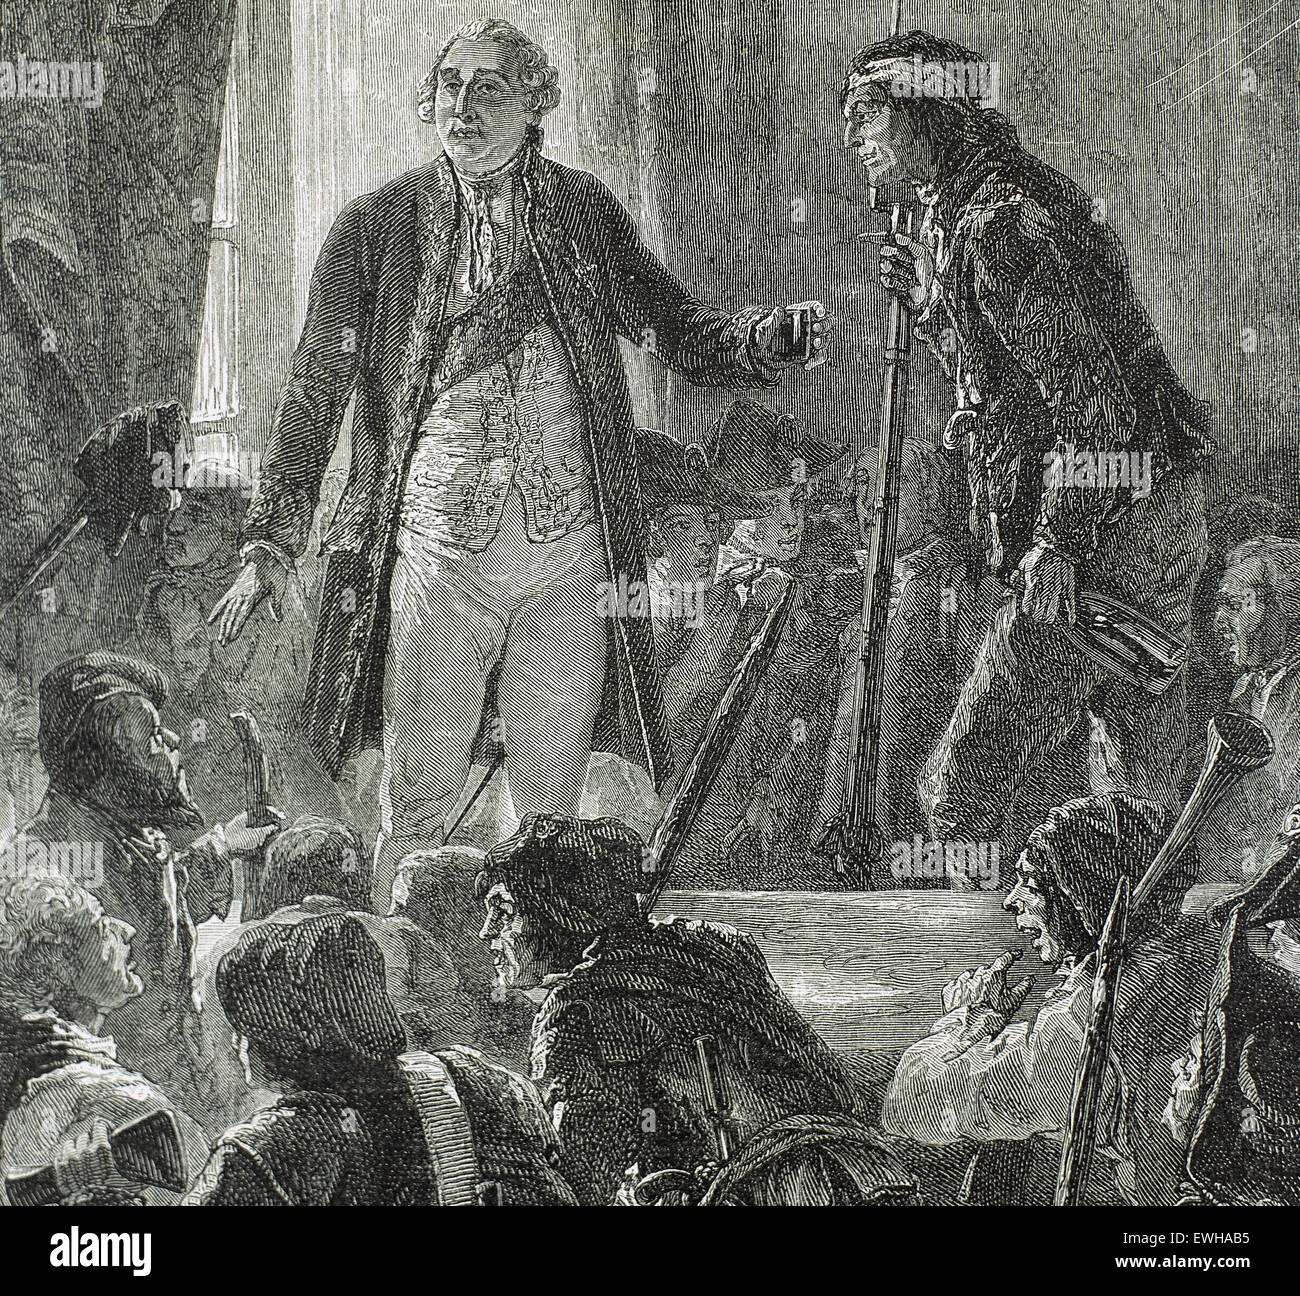 French Revolution. Sansculottes offering wine to King Louis XVI. drink the health of the nation. Engraving by P. Jonnard. La Historia de Francia, 1900. Stock Photo